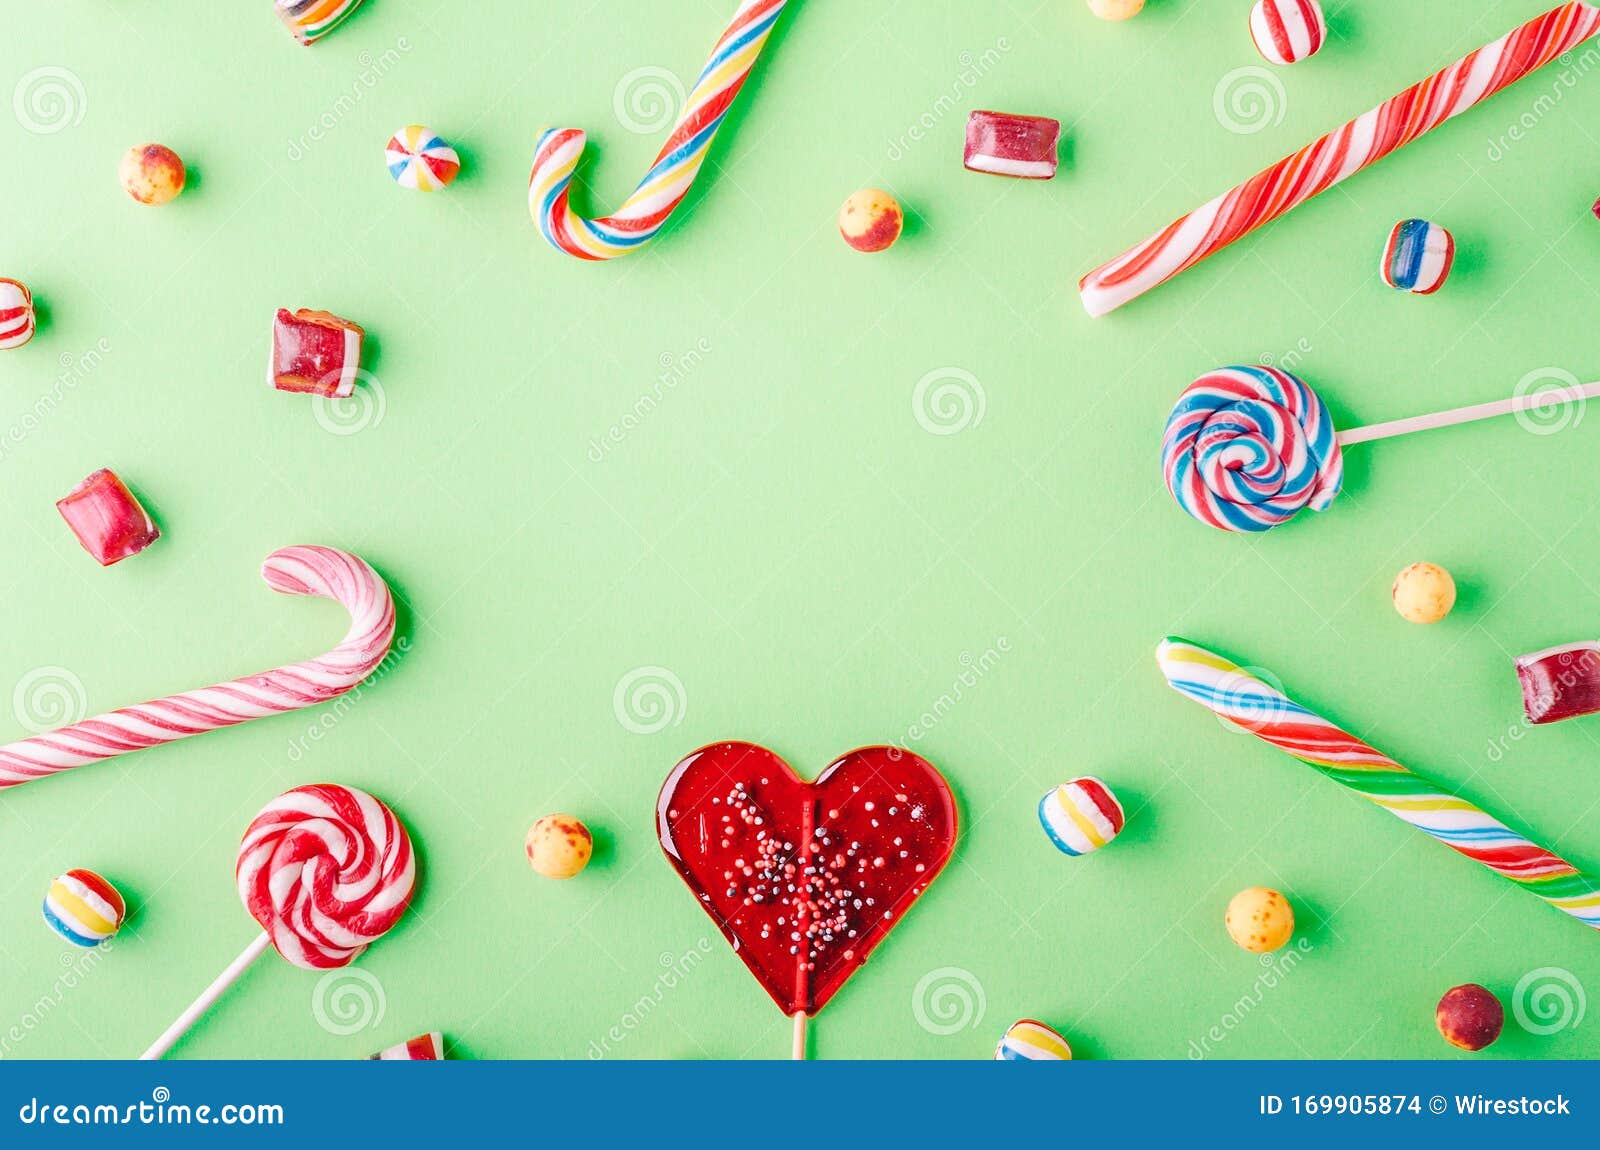 High Angle Shot of Candy Canes and Lollipops on a Green Background ...